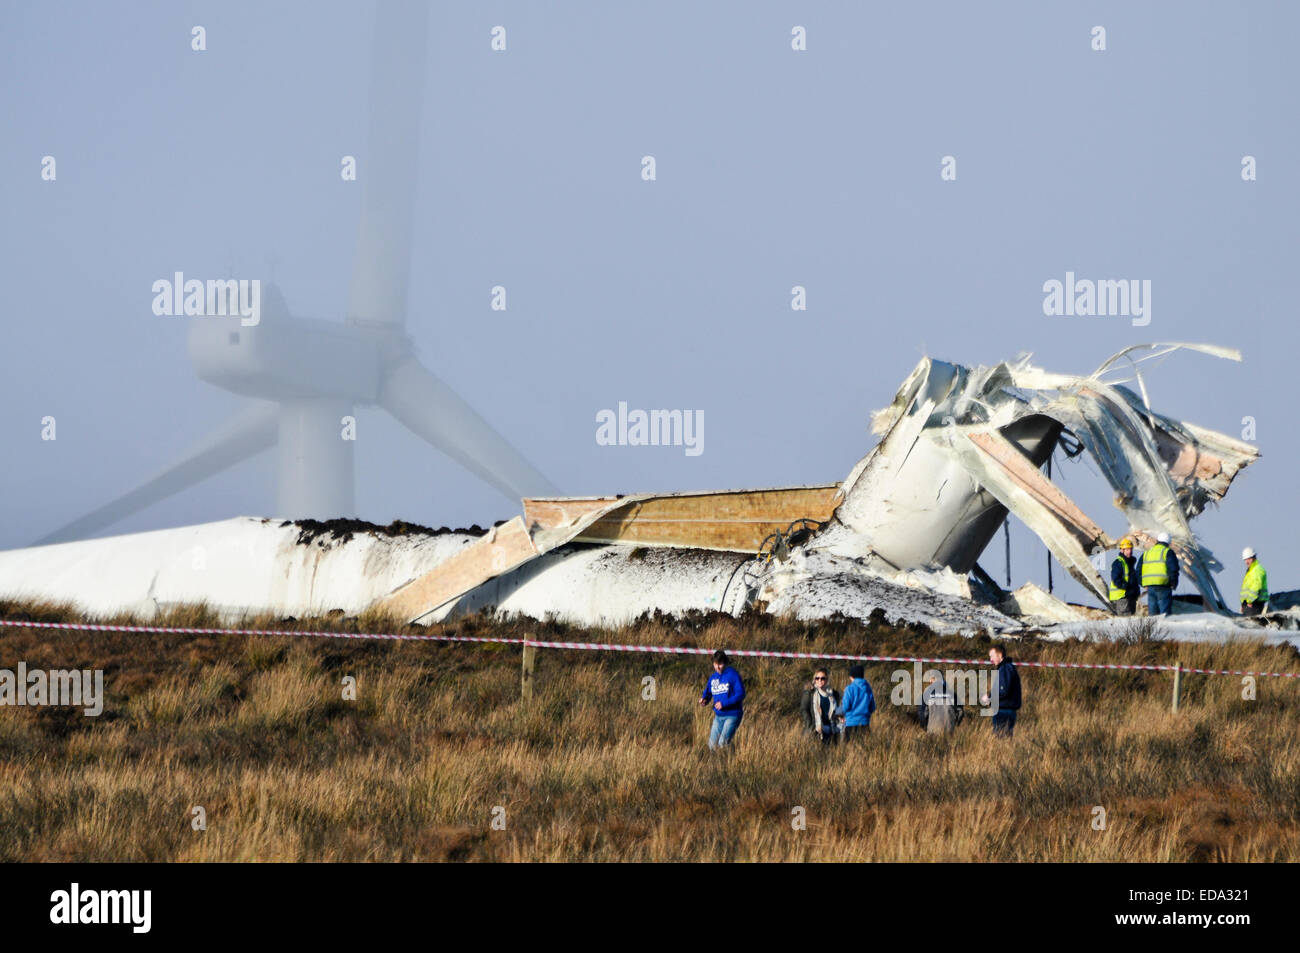 Fintona, Northern Ireland.  3 Jan 2015 - An 80m wind turbine disintegrated and collapsed after developing a fault.  Local residents say the Screggagh wind farm on Murley mountain developed a noise which could be heard 10 miles away, before speeding up and finally disintegrating.  Debris, some the size of cars was flung over 1/2 a mile away.  Nobody was injured. Credit:  Stephen Barnes/Alamy Live News Stock Photo